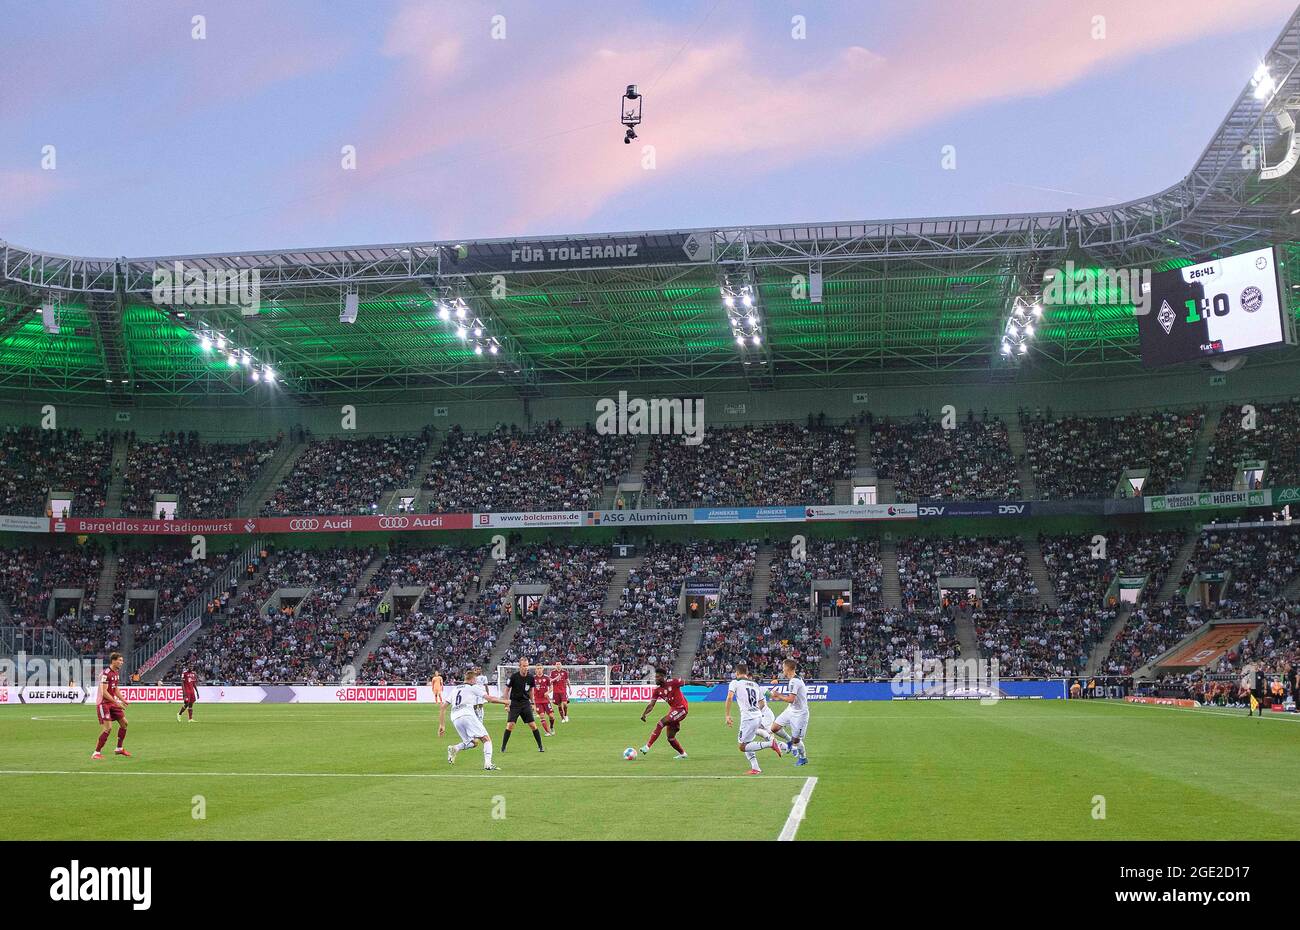 Game scene in Borussia-Park, action, in front of evening sky, soccer 1st  Bundesliga, 1st matchday, Borussia Monchengladbach (MG) - FC Bayern Munich  (M) 1: 1, on August 13th, 2021 in Borussia Monchengladbach/Germany. #